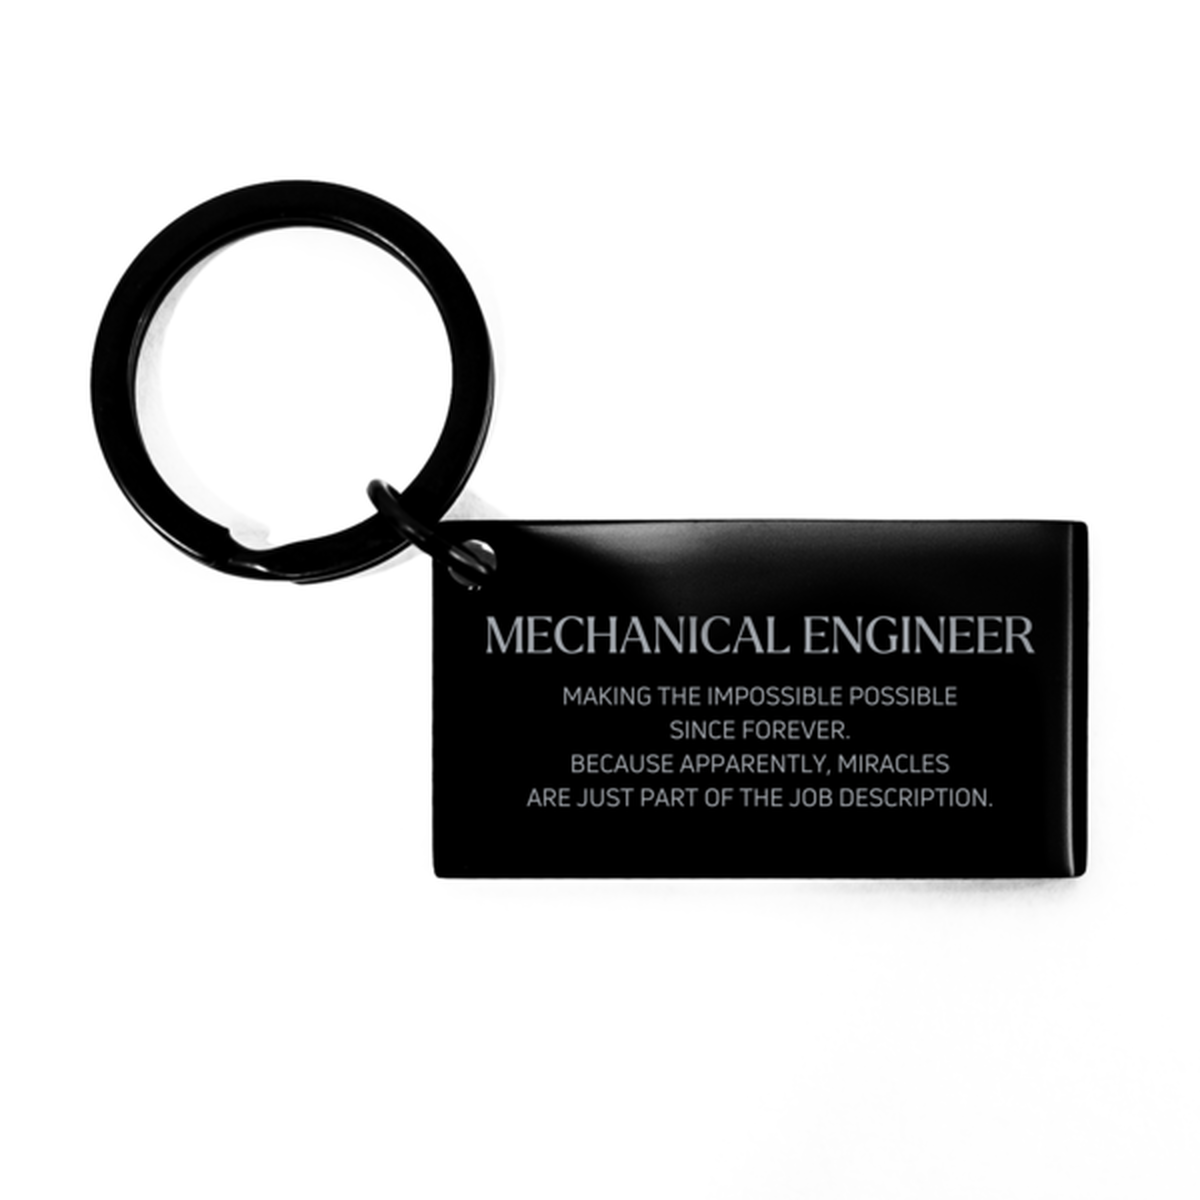 Funny Mechanical Engineer Gifts, Miracles are just part of the job description, Inspirational Birthday Keychain For Mechanical Engineer, Men, Women, Coworkers, Friends, Boss